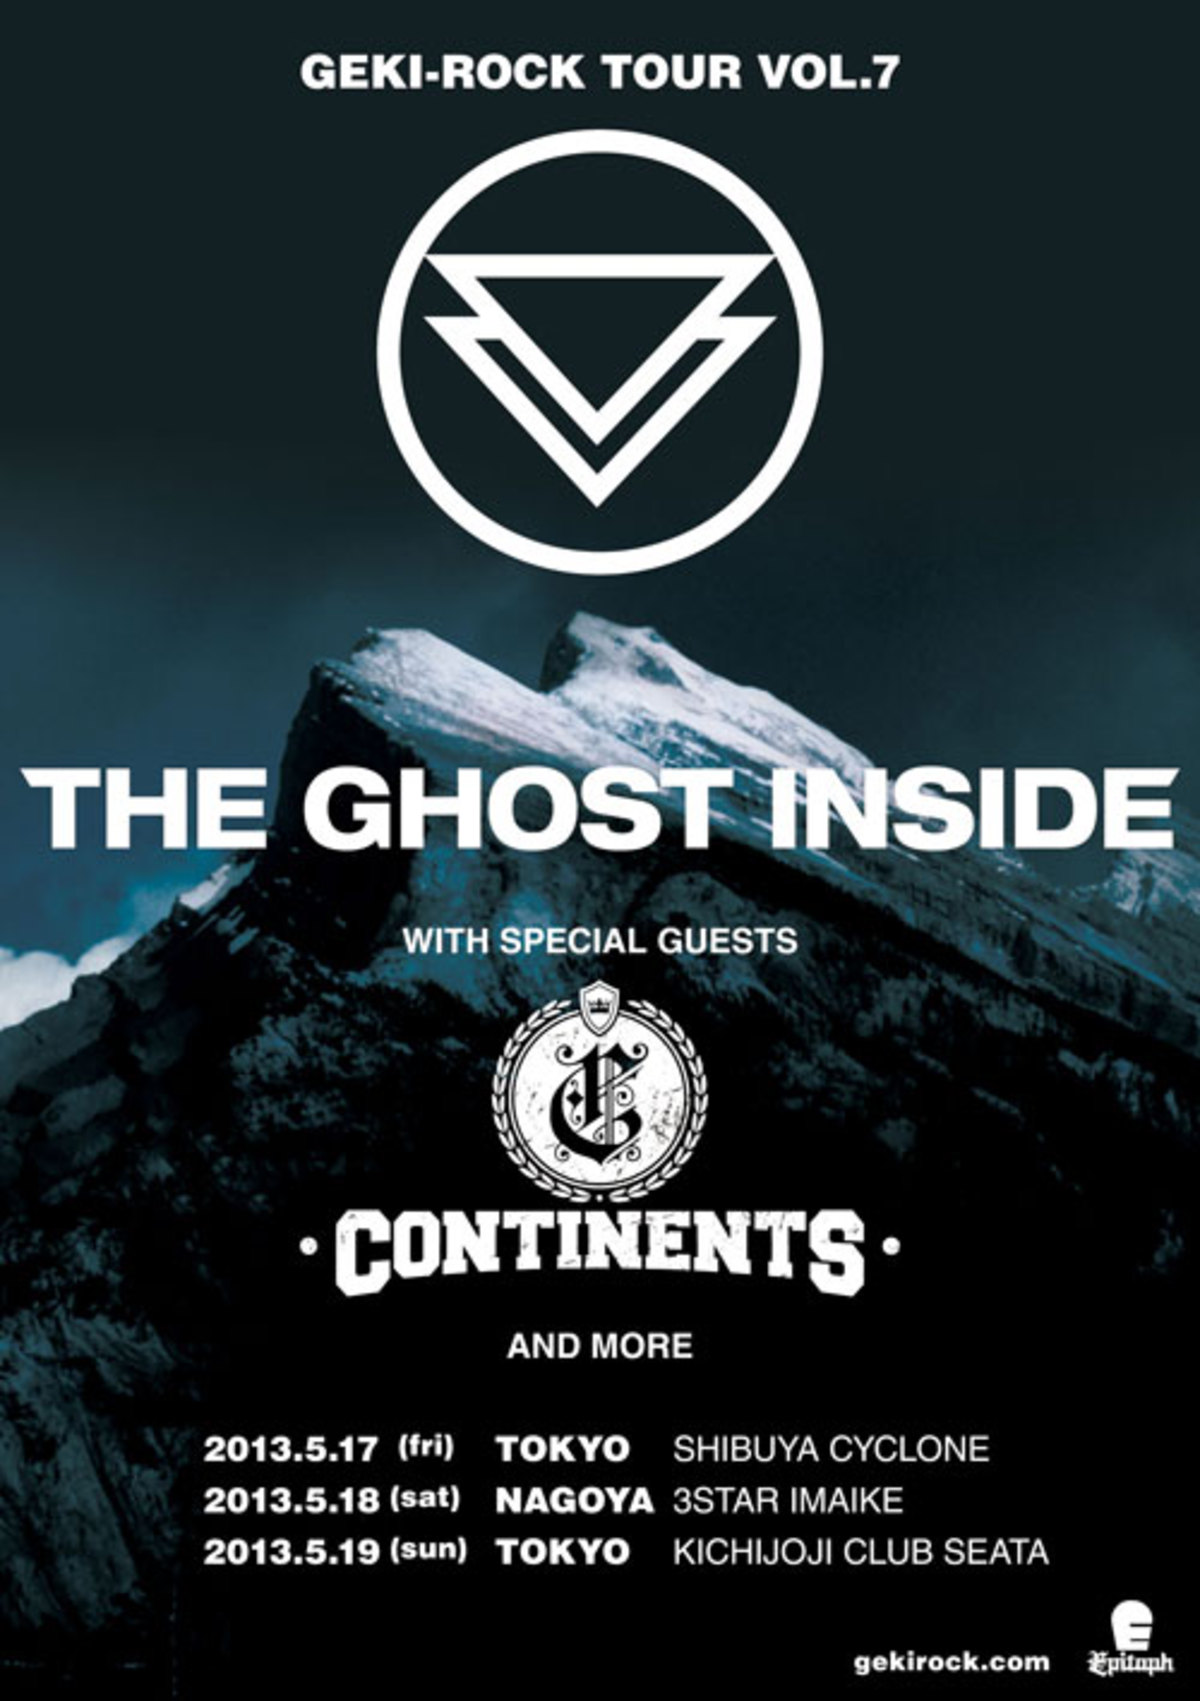 THE GHOST INSIDE、CONTINENTSと共に激ロックTOUR VOL.7にて来日決定 